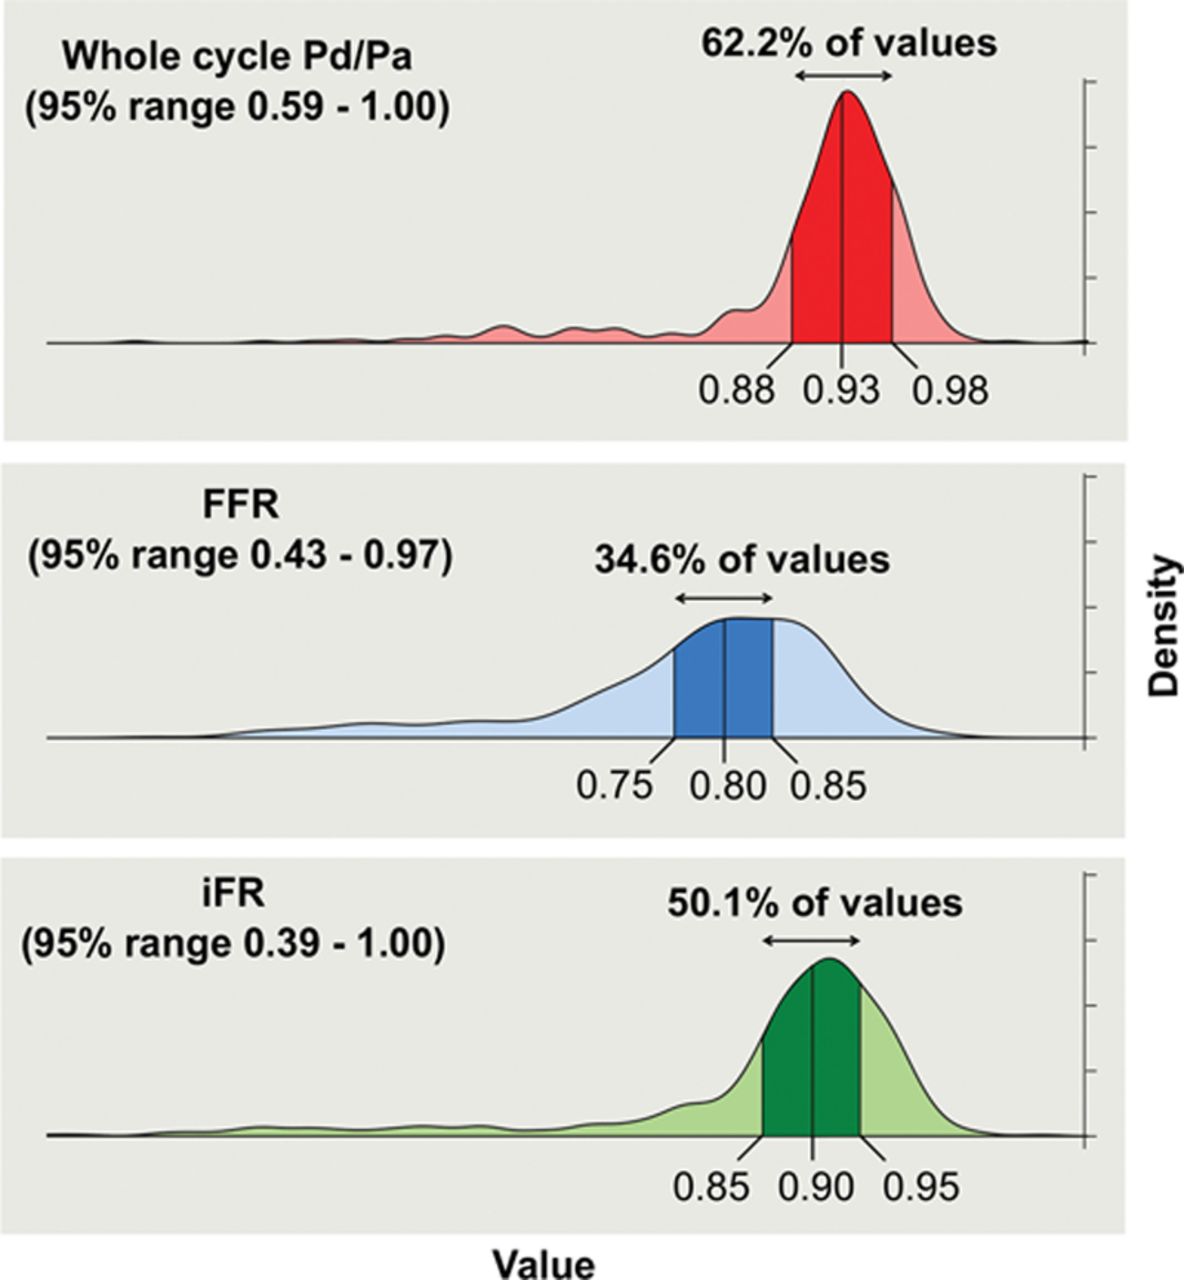 Set of charts showing the distribution of values for FFR, IFR and whole-cycle PD/PA